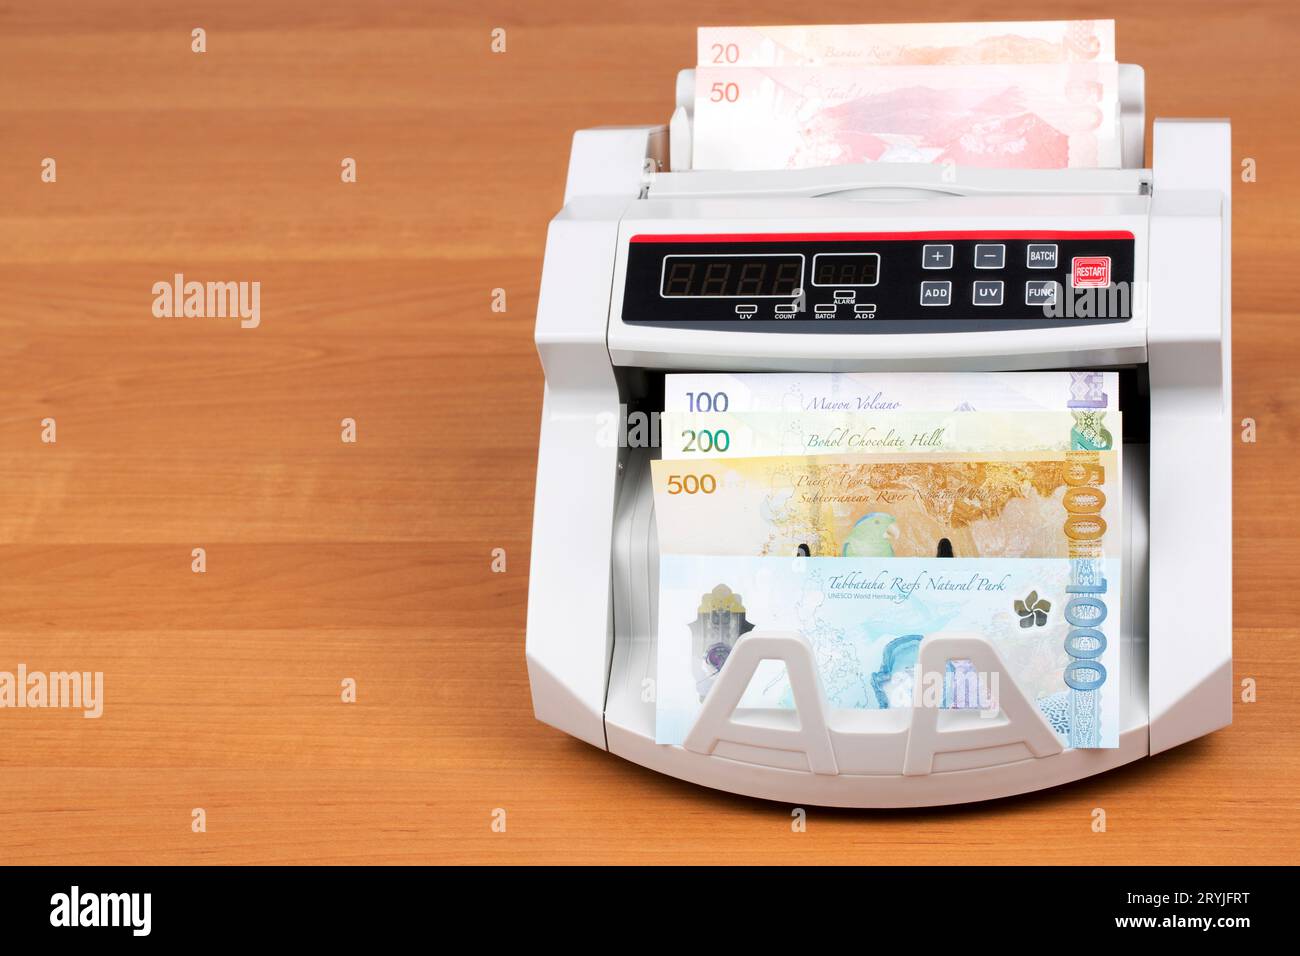 Philippine money in a counting machine Stock Photo